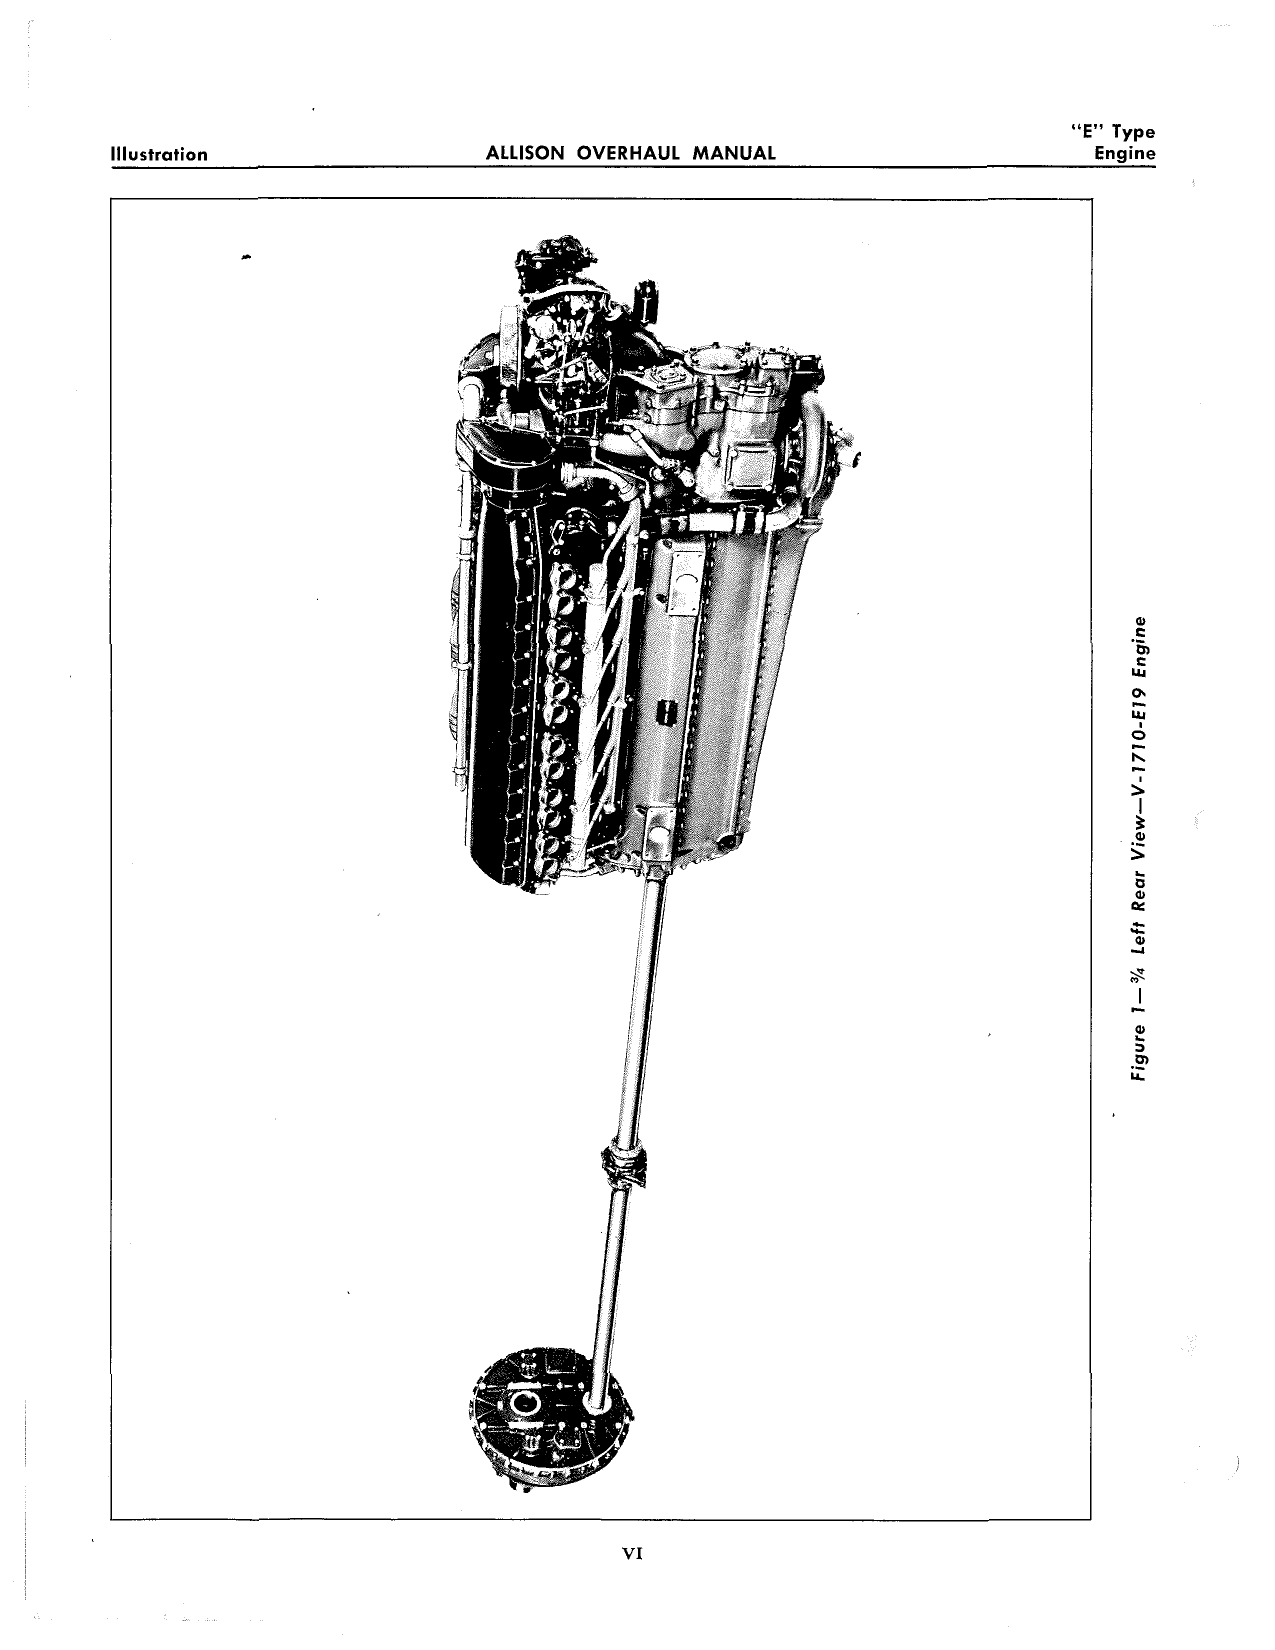 Sample page 8 from AirCorps Library document: Overhaul Manual - Allison V-1710-E Engine